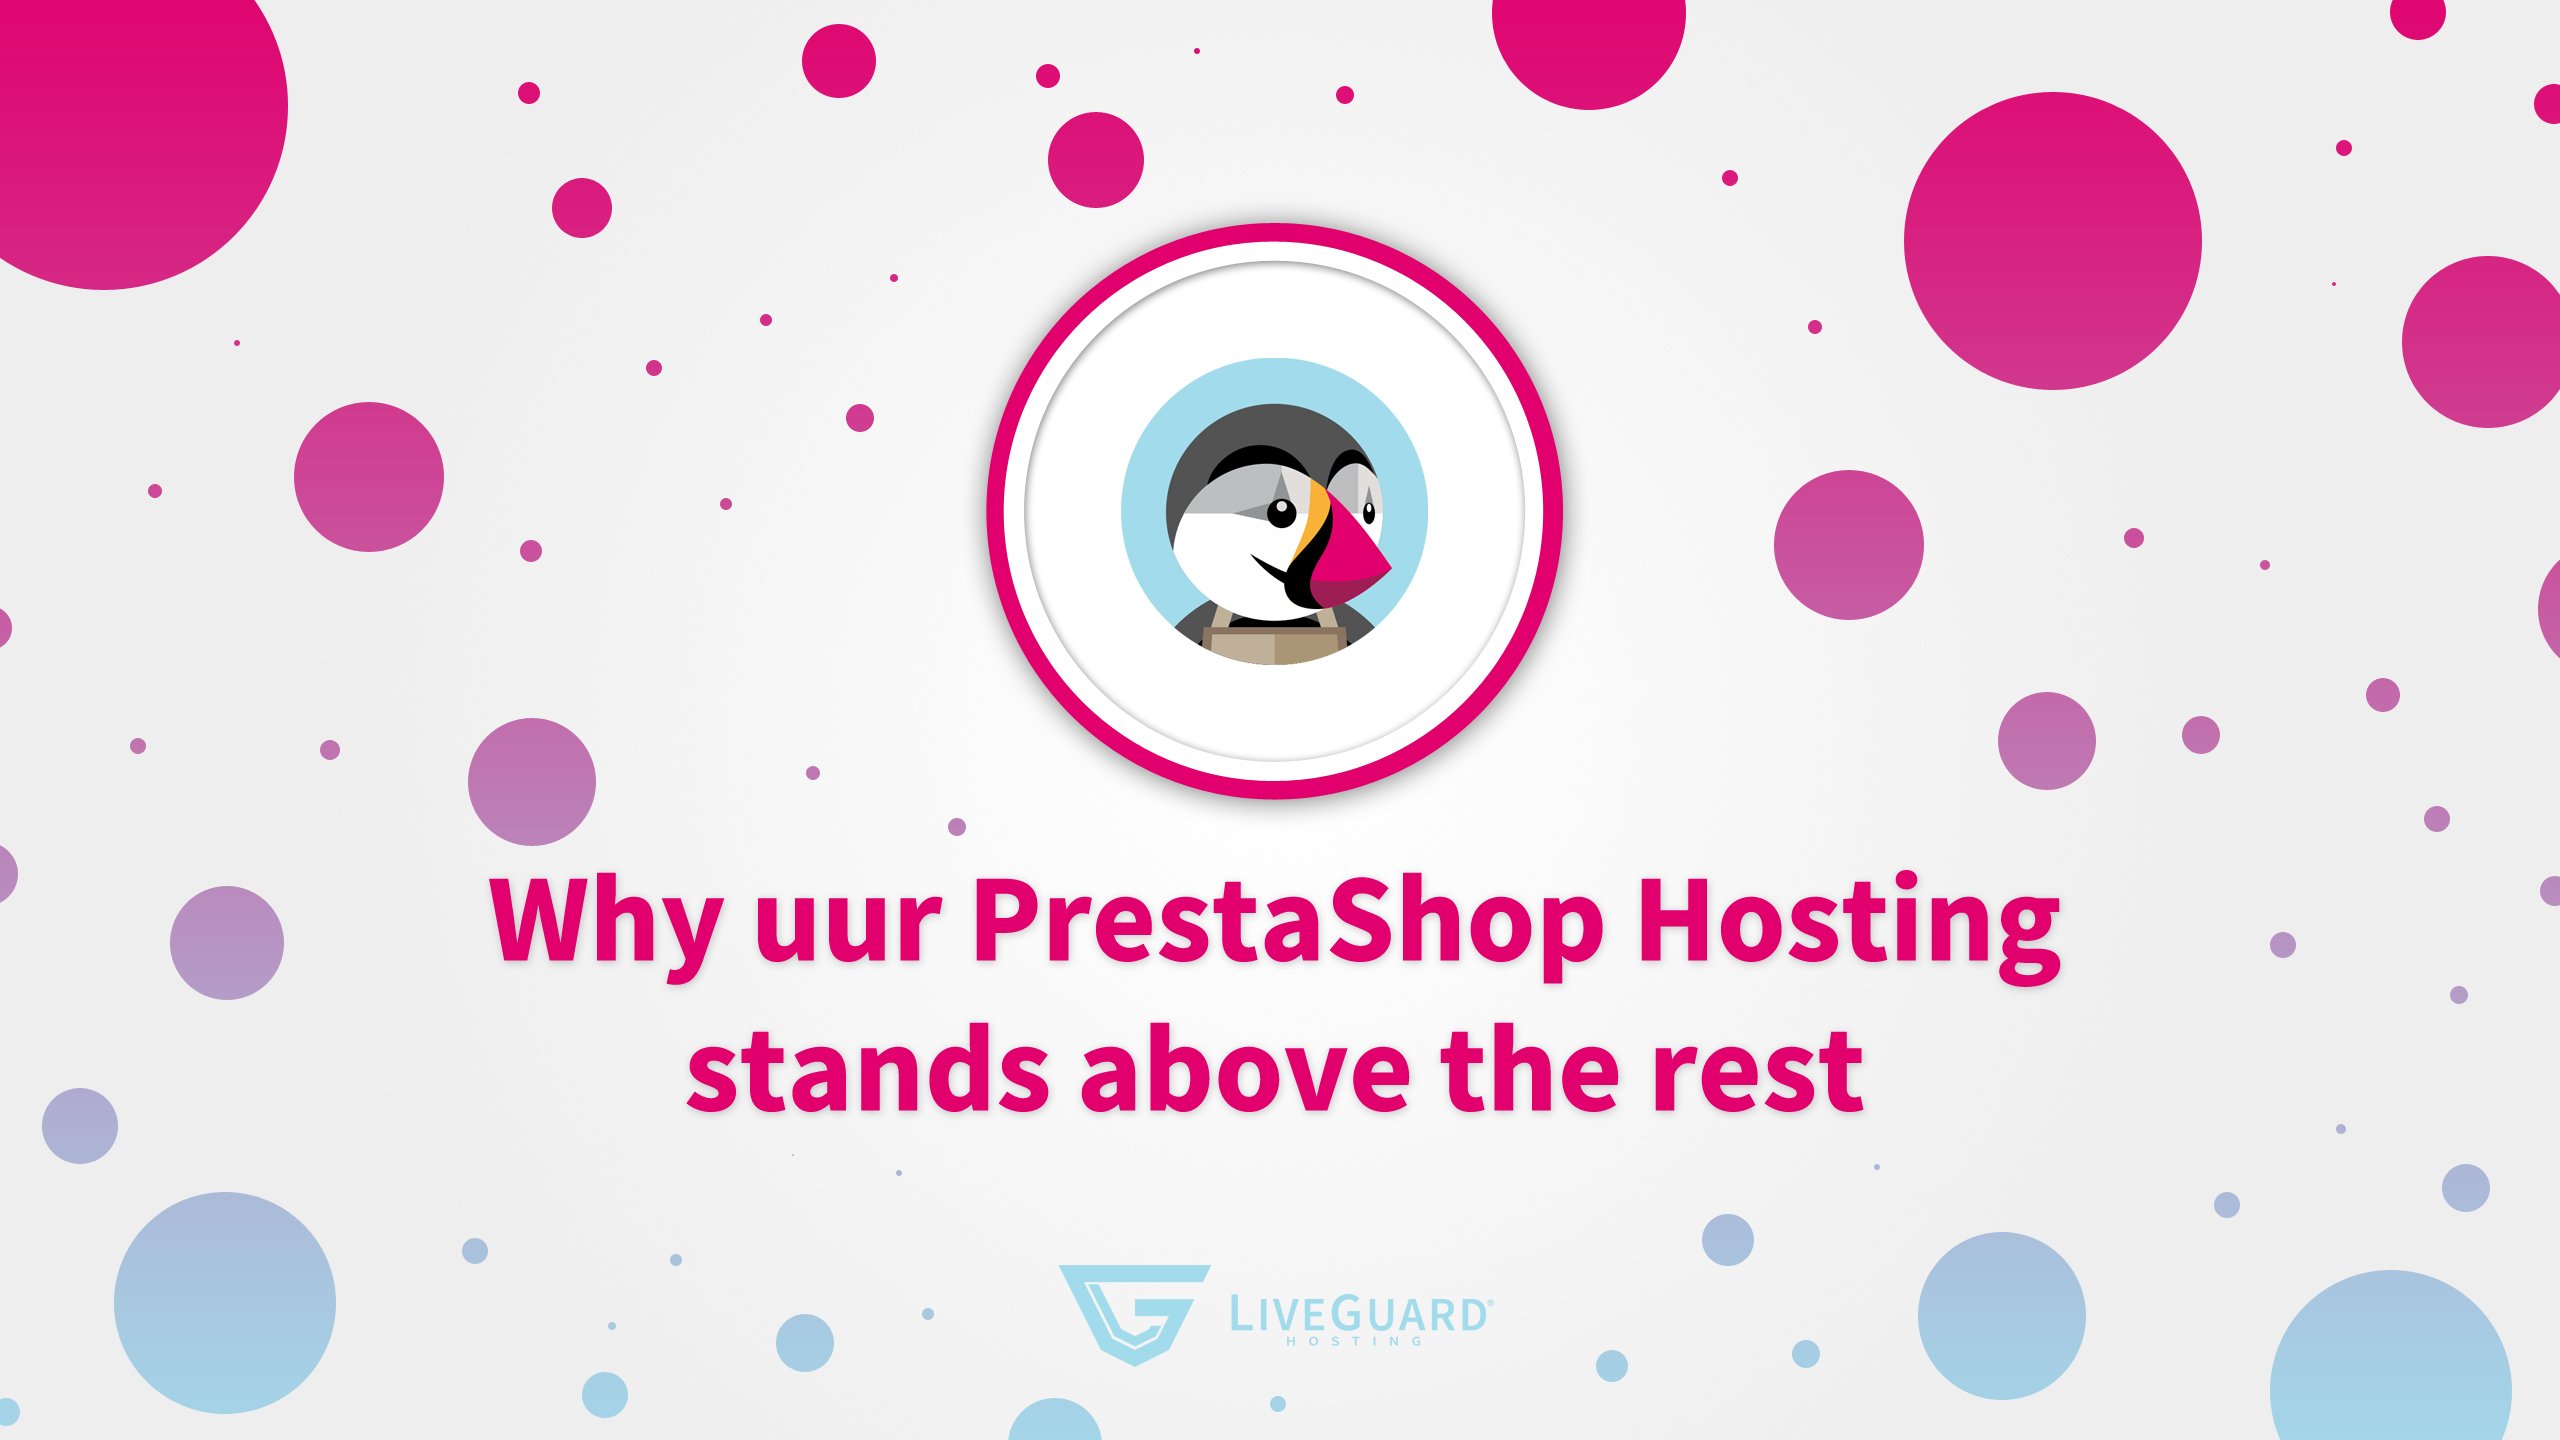 Why Our PrestaShop Hosting Stands Above the Rest